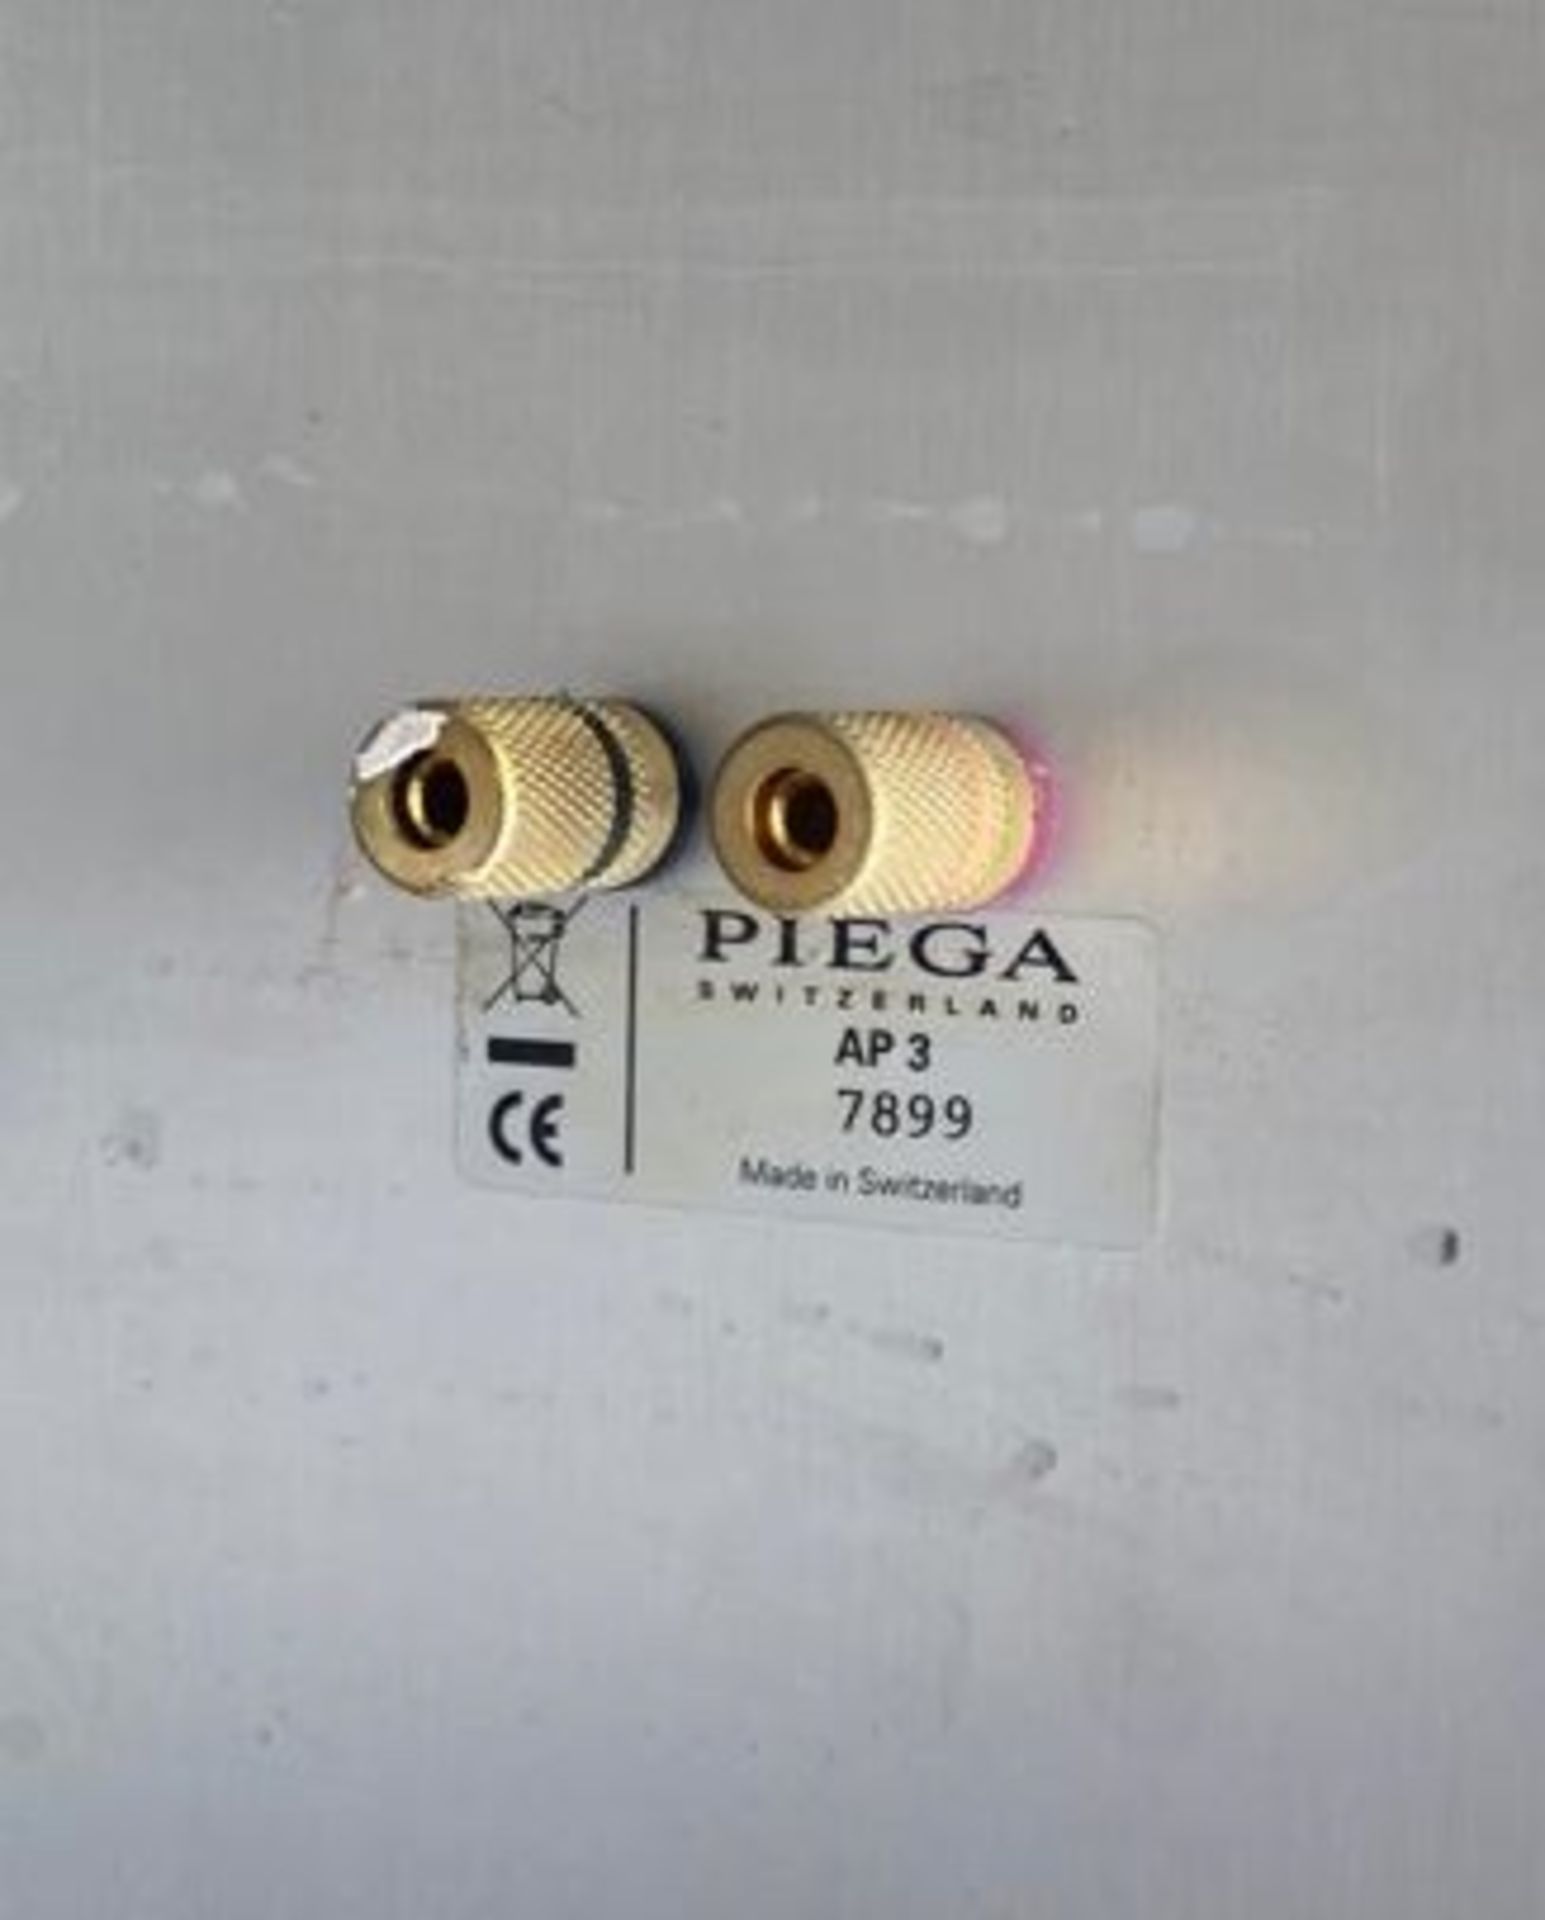 4 x Piega AP3 Wall Mounted 150w Speakers - Dimensions (mm): 420x200x250 - Image 3 of 3